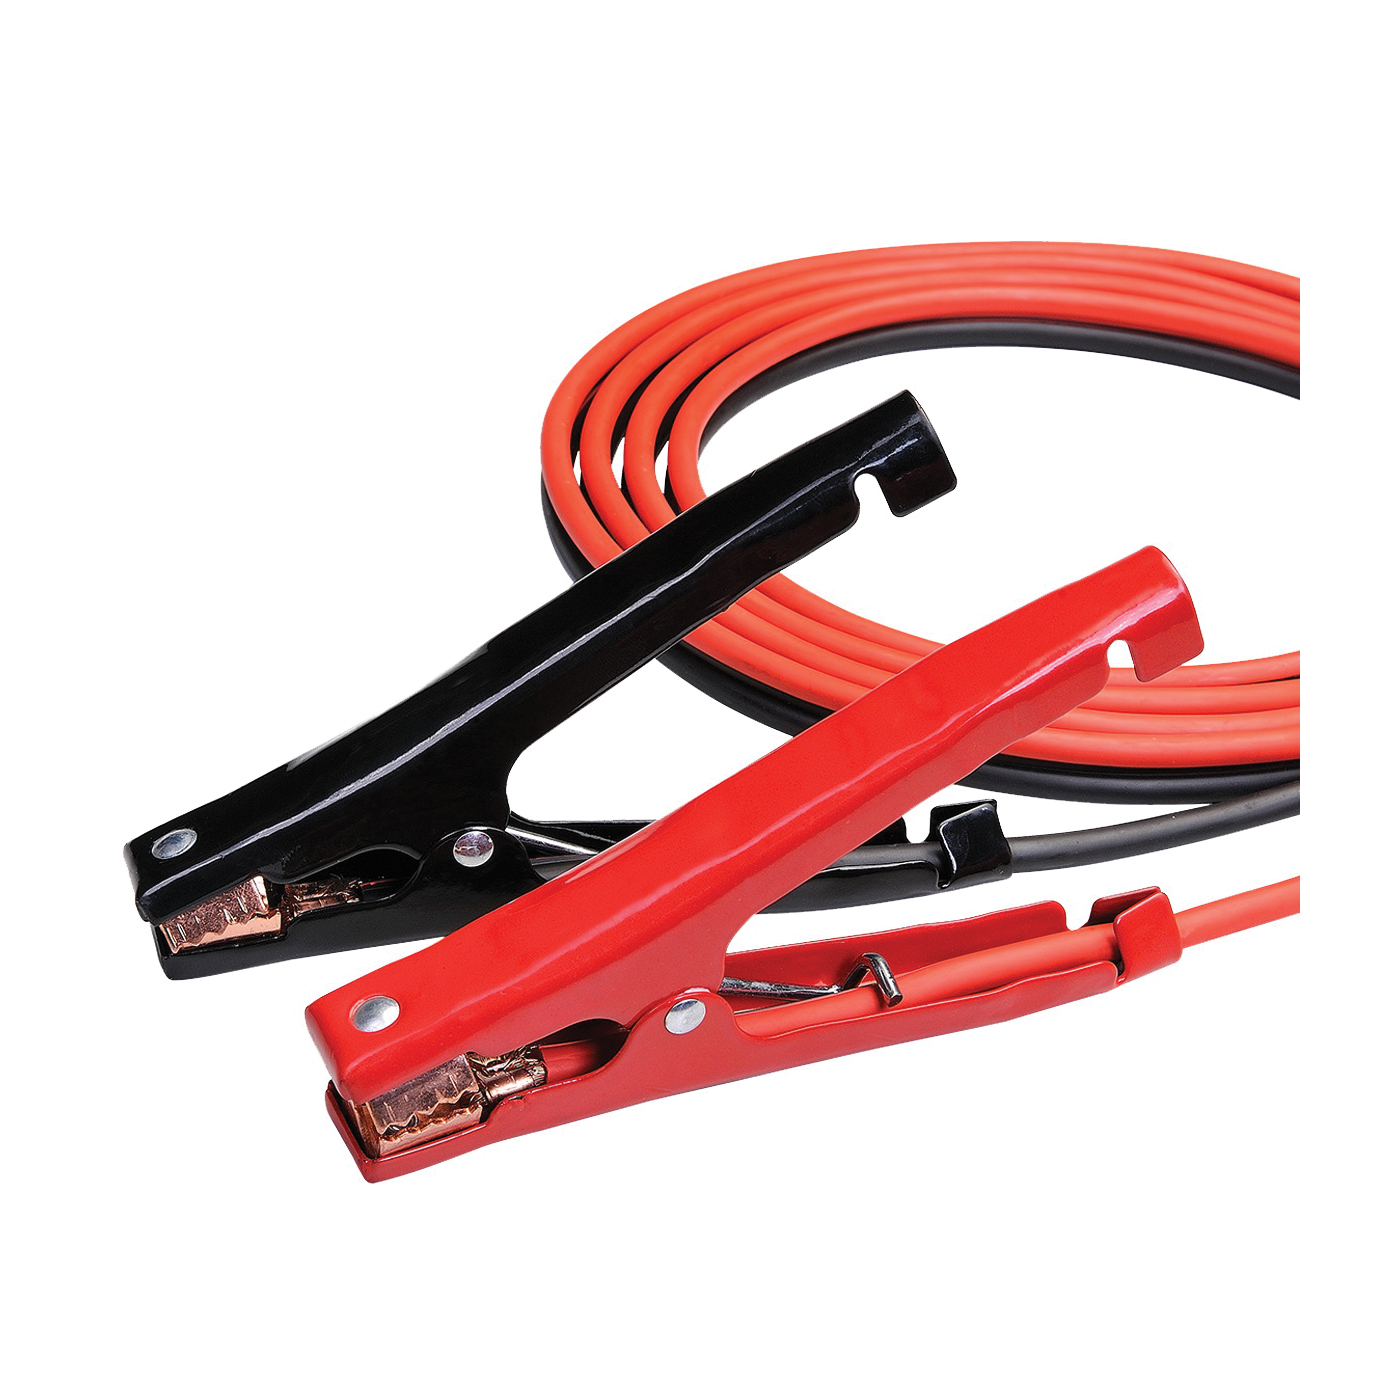 081214 Booster Cable, 8 AWG Wire, 4-Conductor, Clamp, Clamp, Stranded, Red/Black Sheath